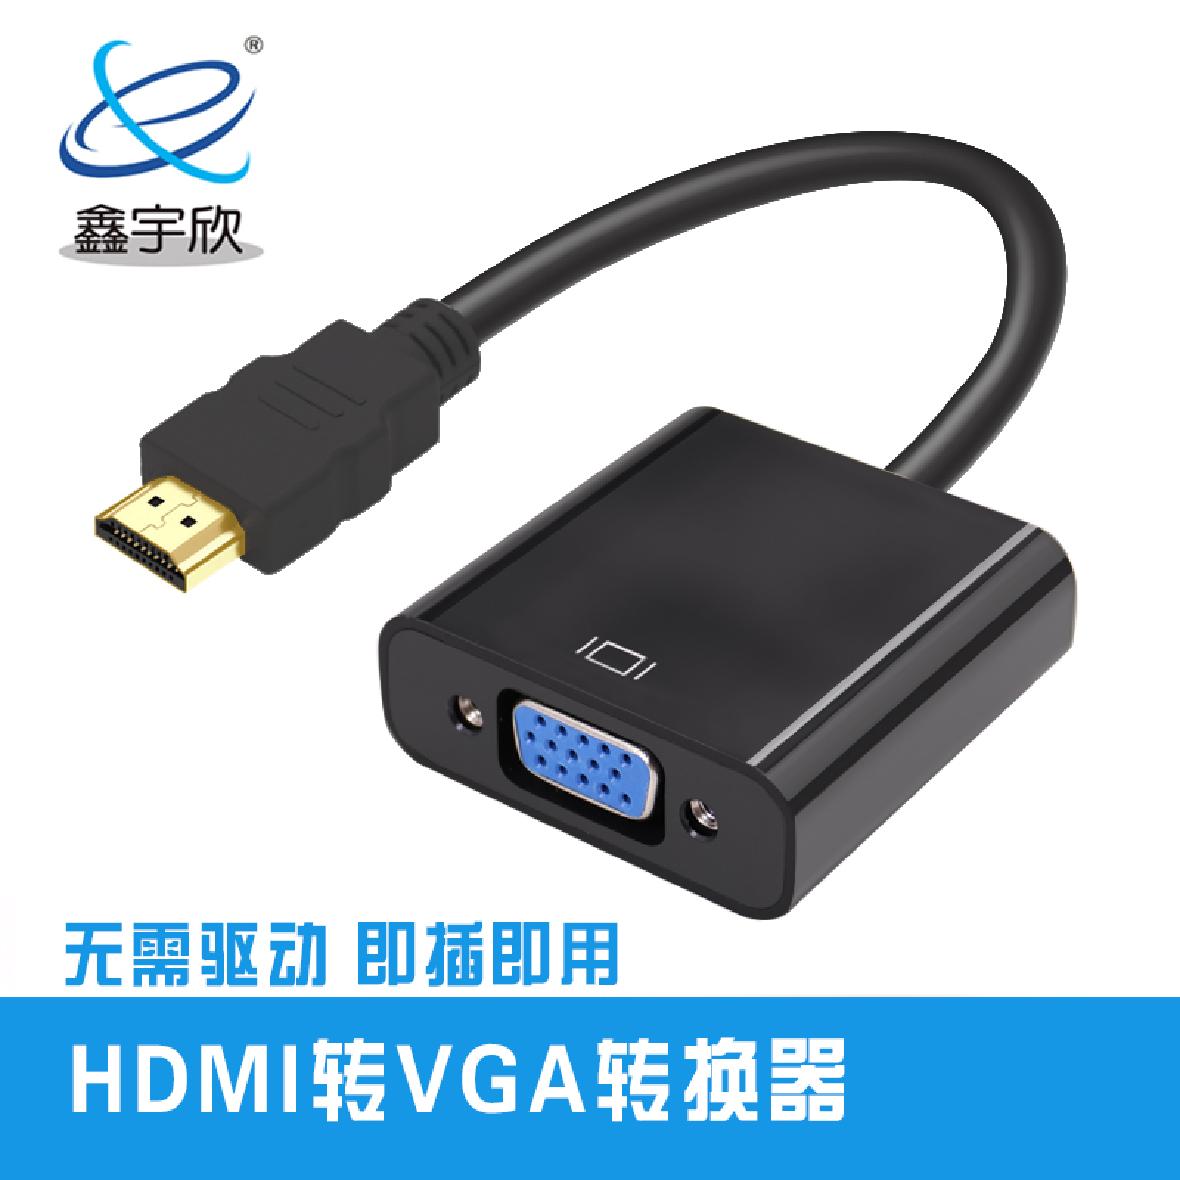  HDMI to VGA converter plug and play without driver